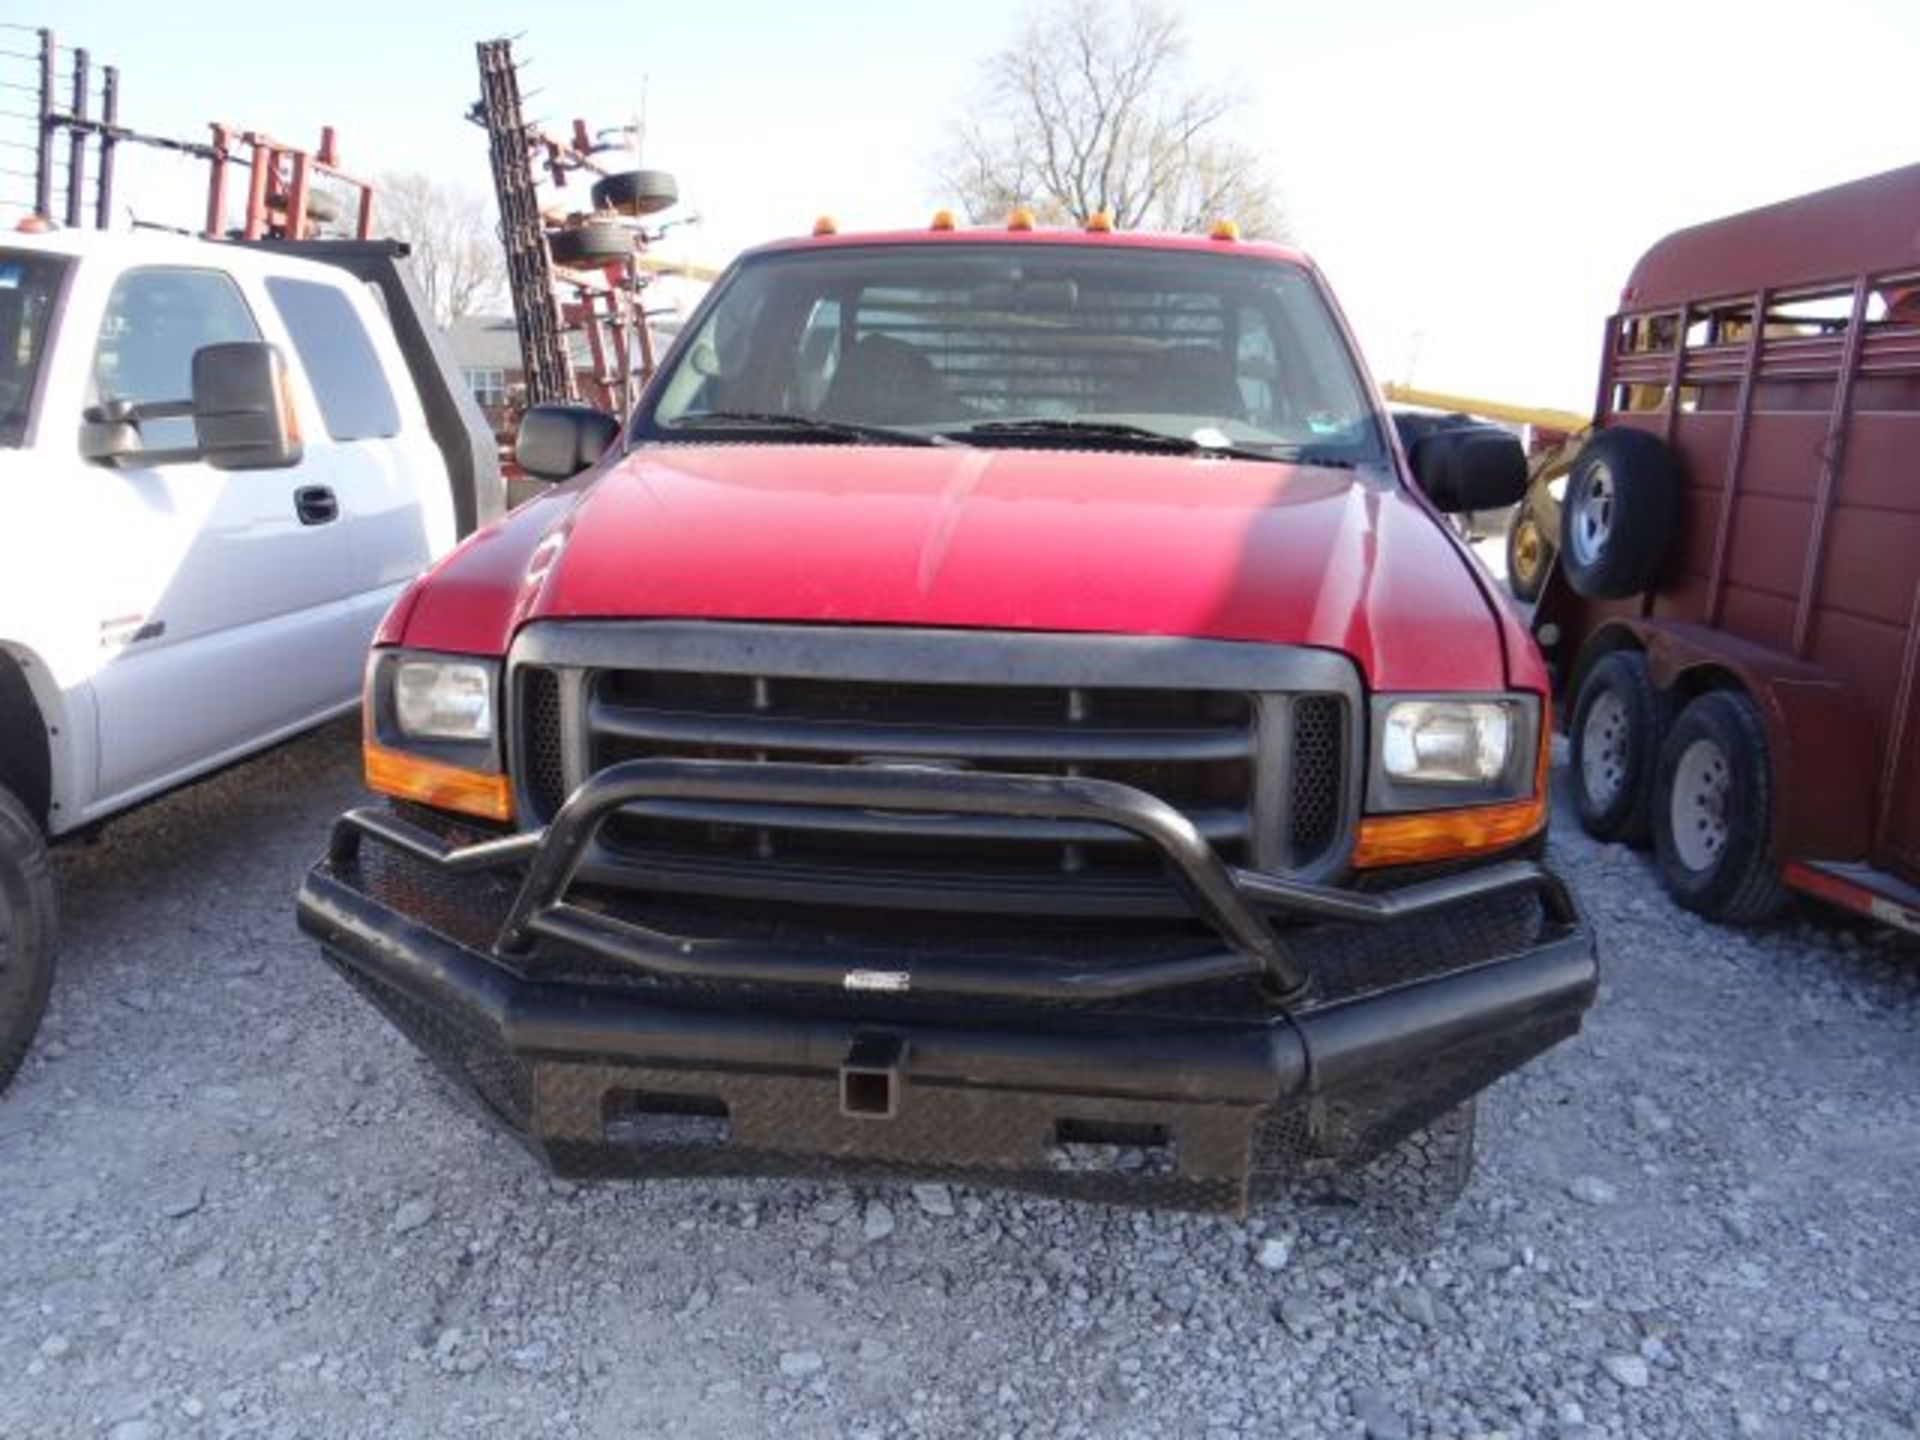 2000 Ford F250 Truck - Image 2 of 5